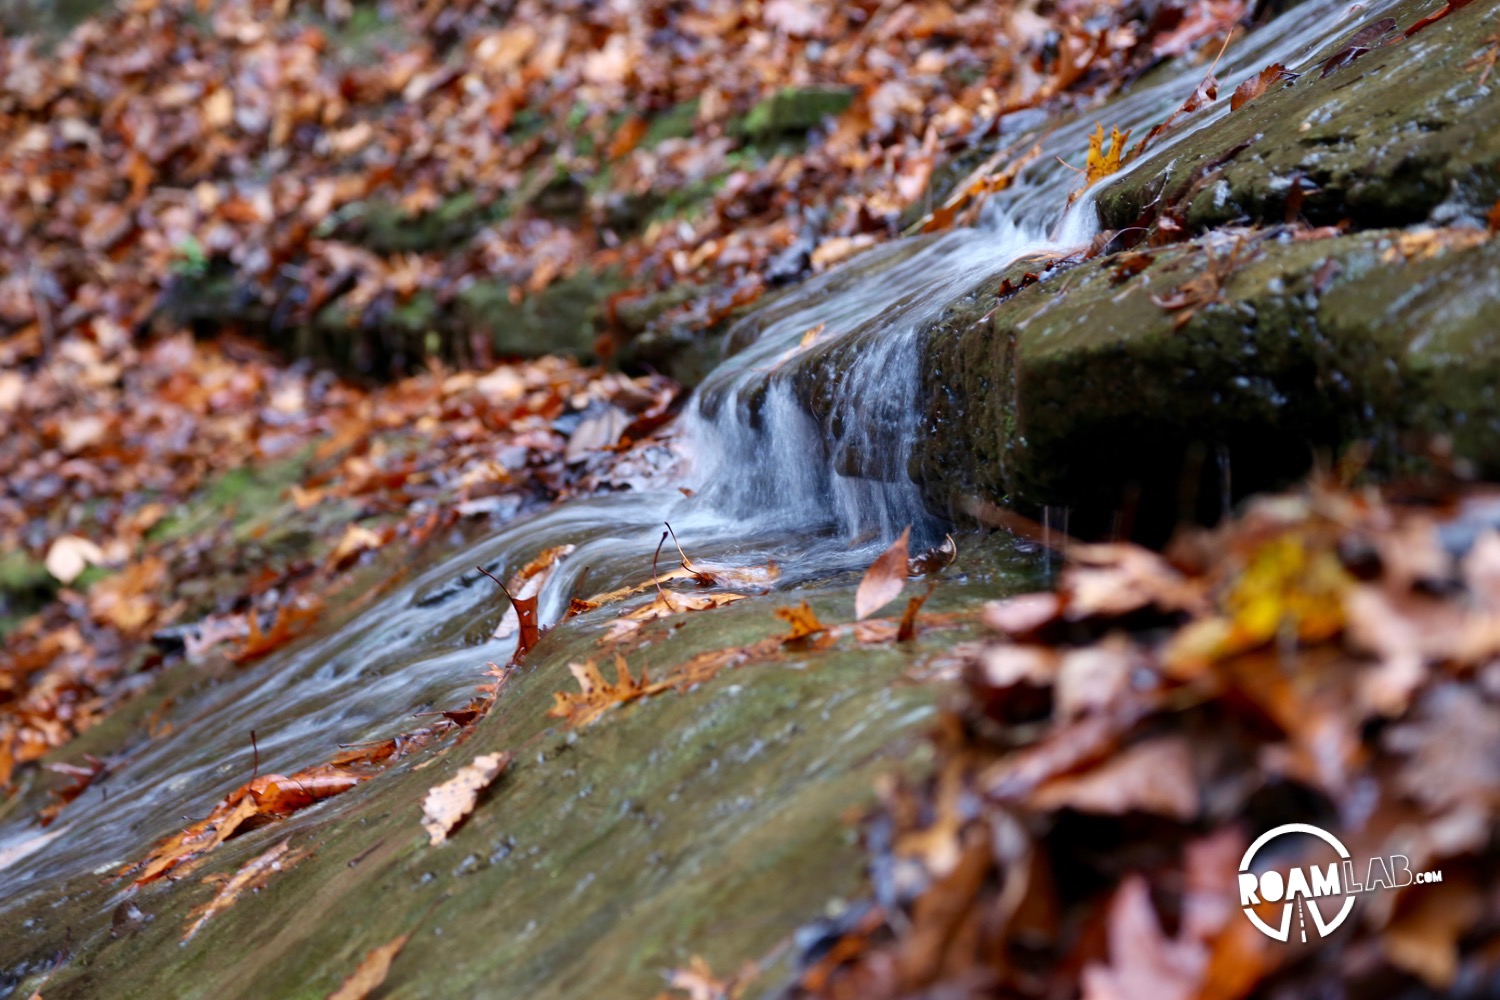 Jackson Falls is one of the iconic waterfalls along the Natchez Trace Parkway.